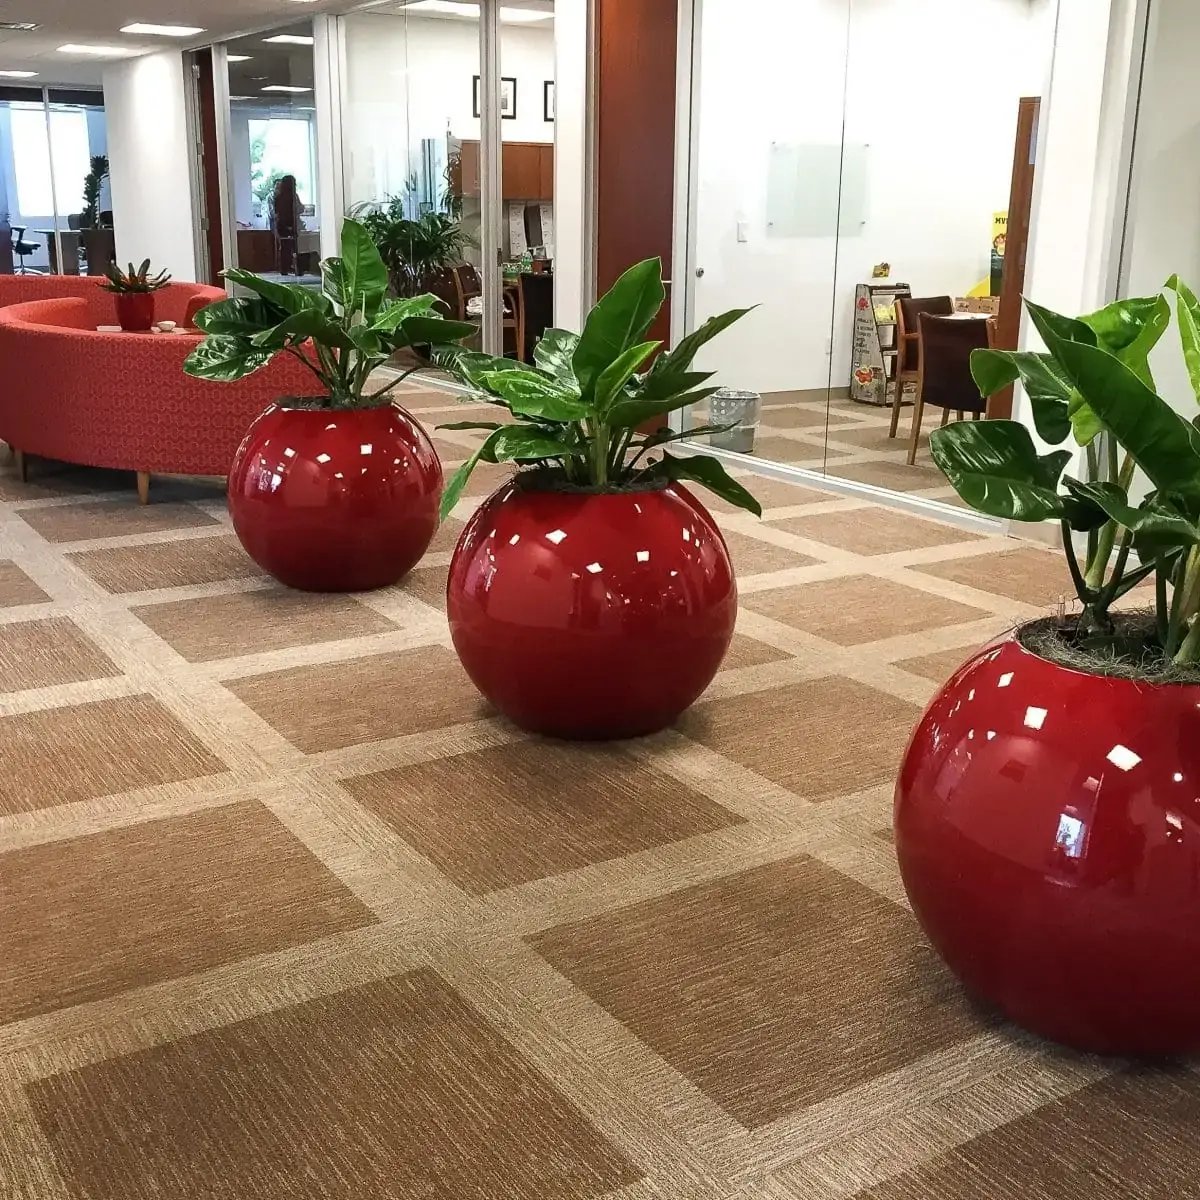 interior lobby with potted plants